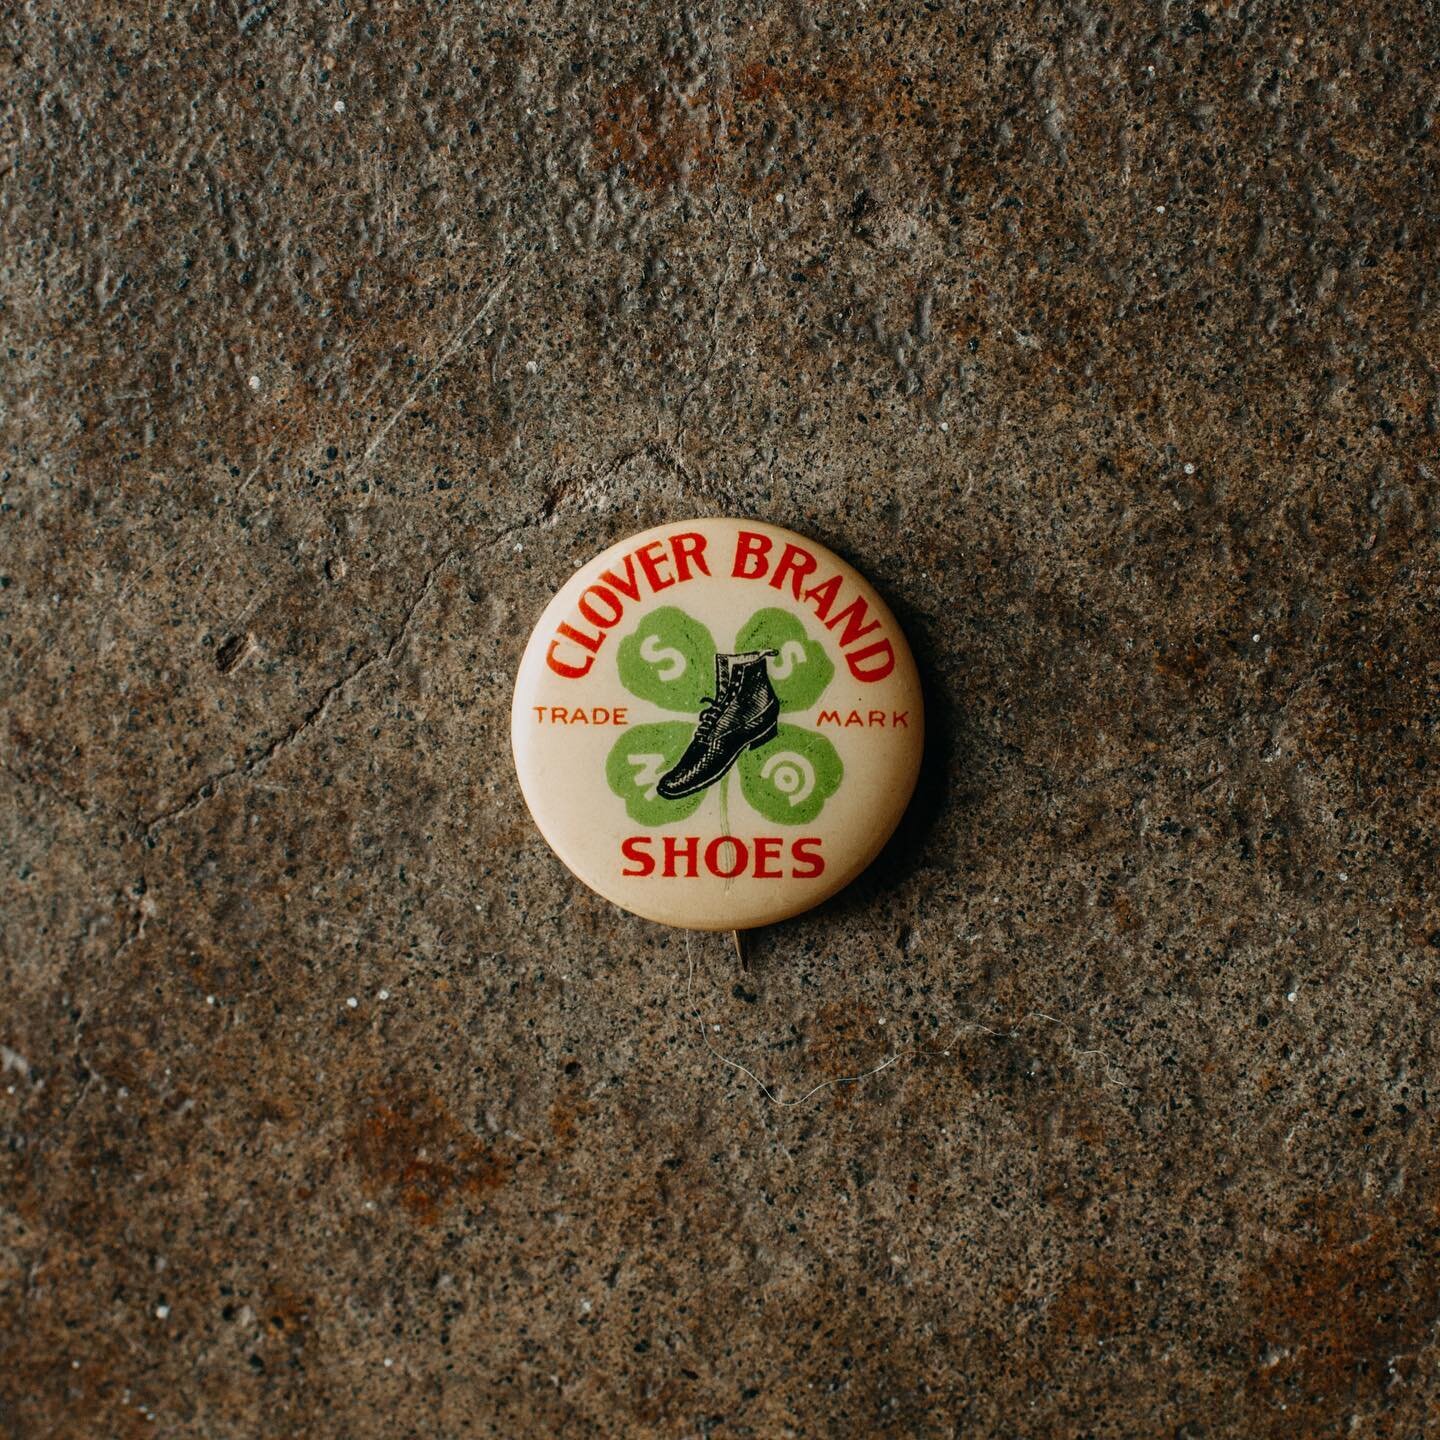 Clover Brand Shoes Advertising Pinback

Clover Brand Shoes advertising pinback button made by Whitehead &amp; Hoag Co. out of Newark NJ. This pin dates is from the early 1900&rsquo;s and is marked with an 1896 patent date. In excellent condition with